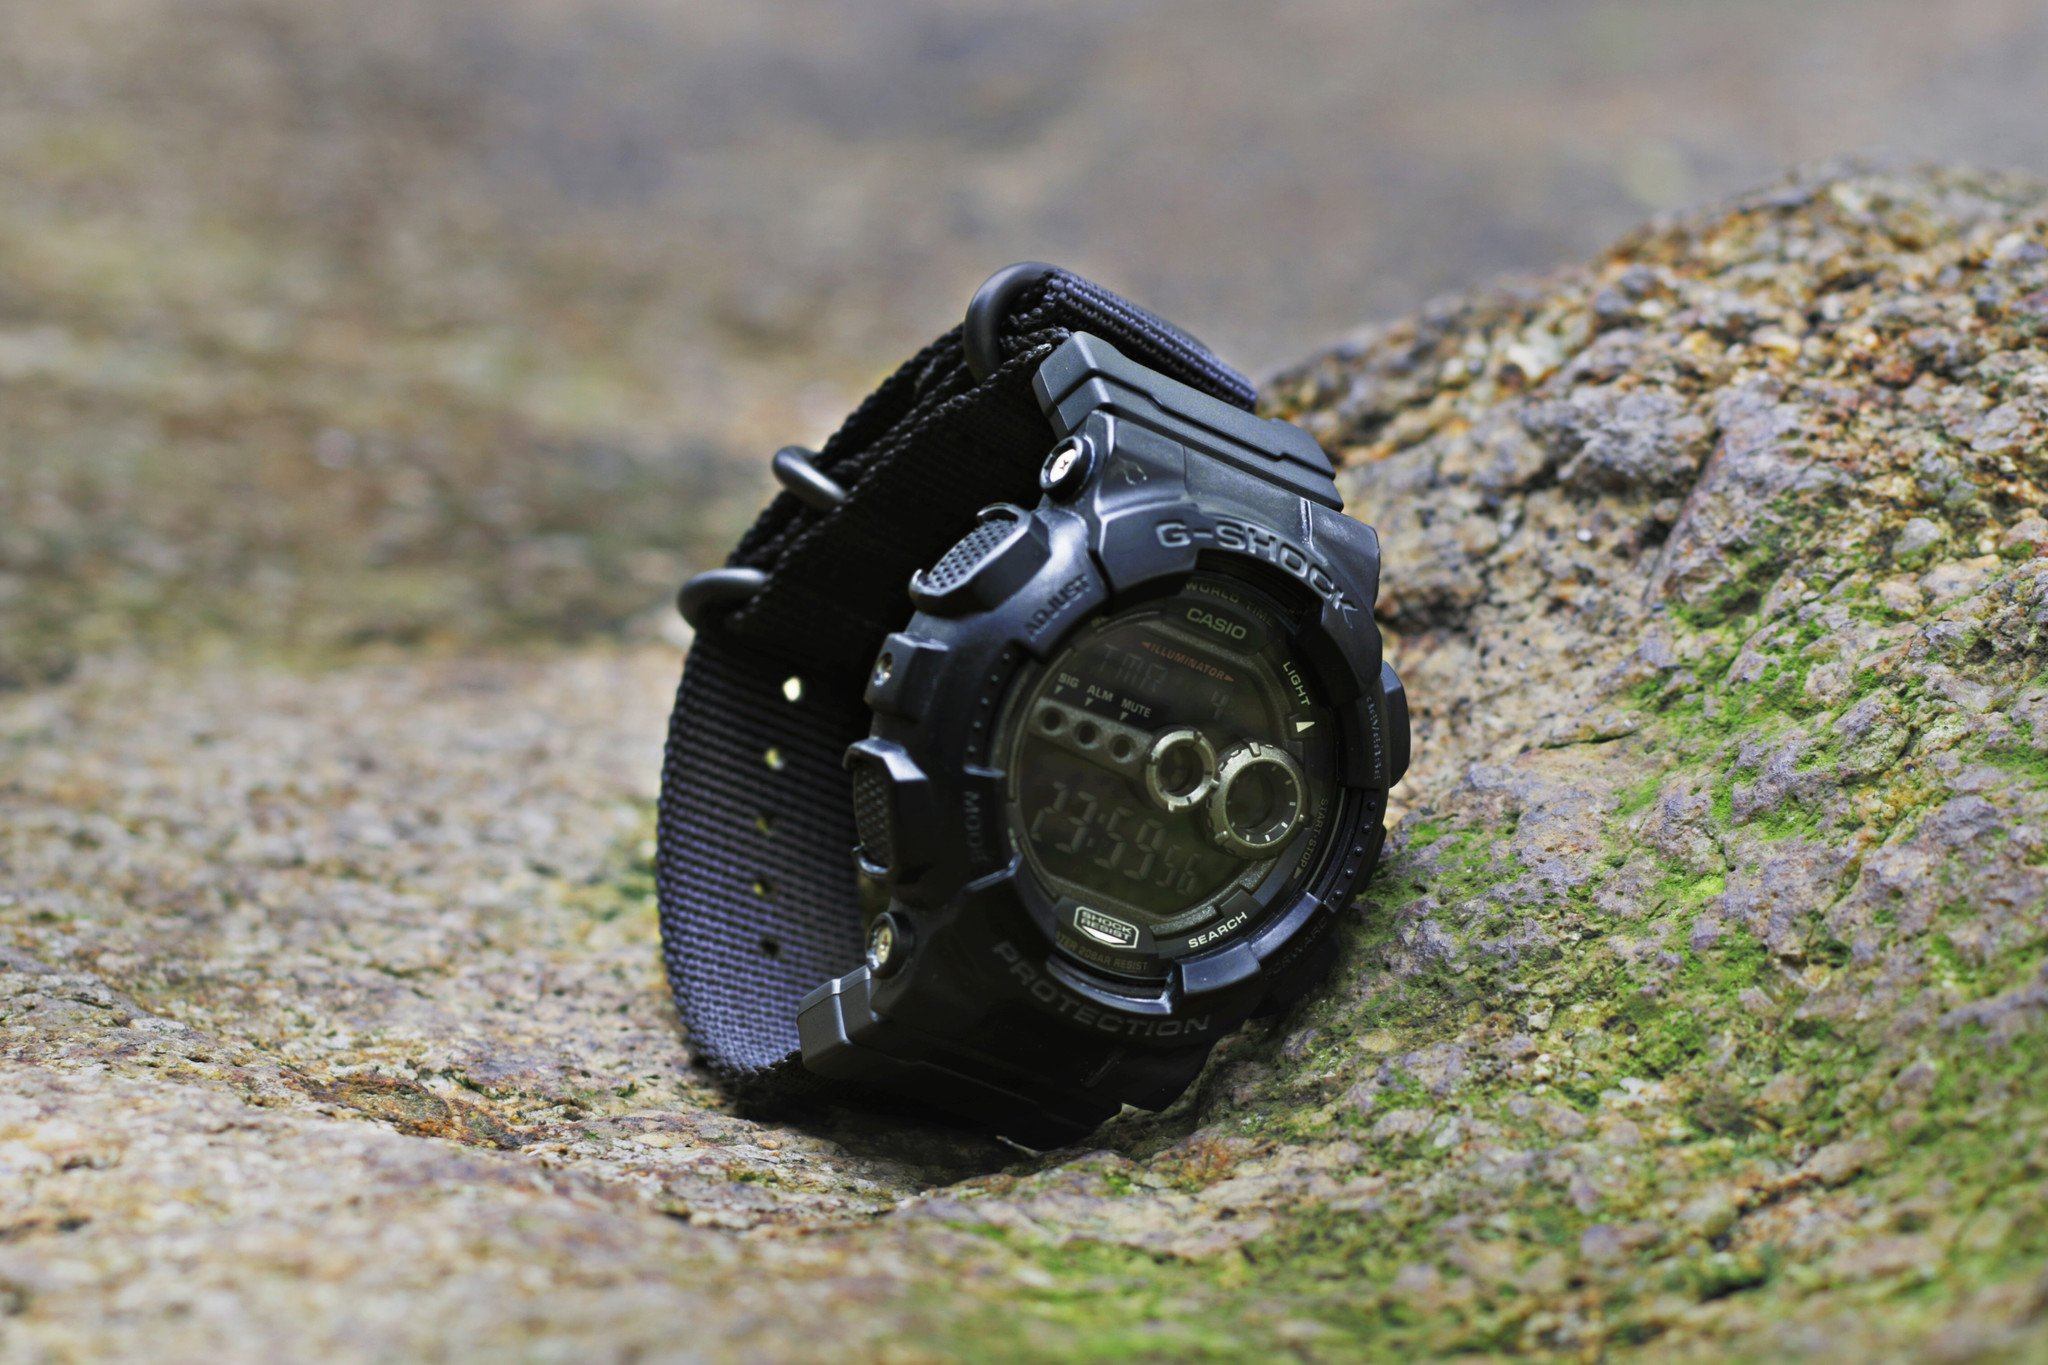 Casio G-Shock GD-100 with 24mm ballistic black nylon strap and Casio adapter